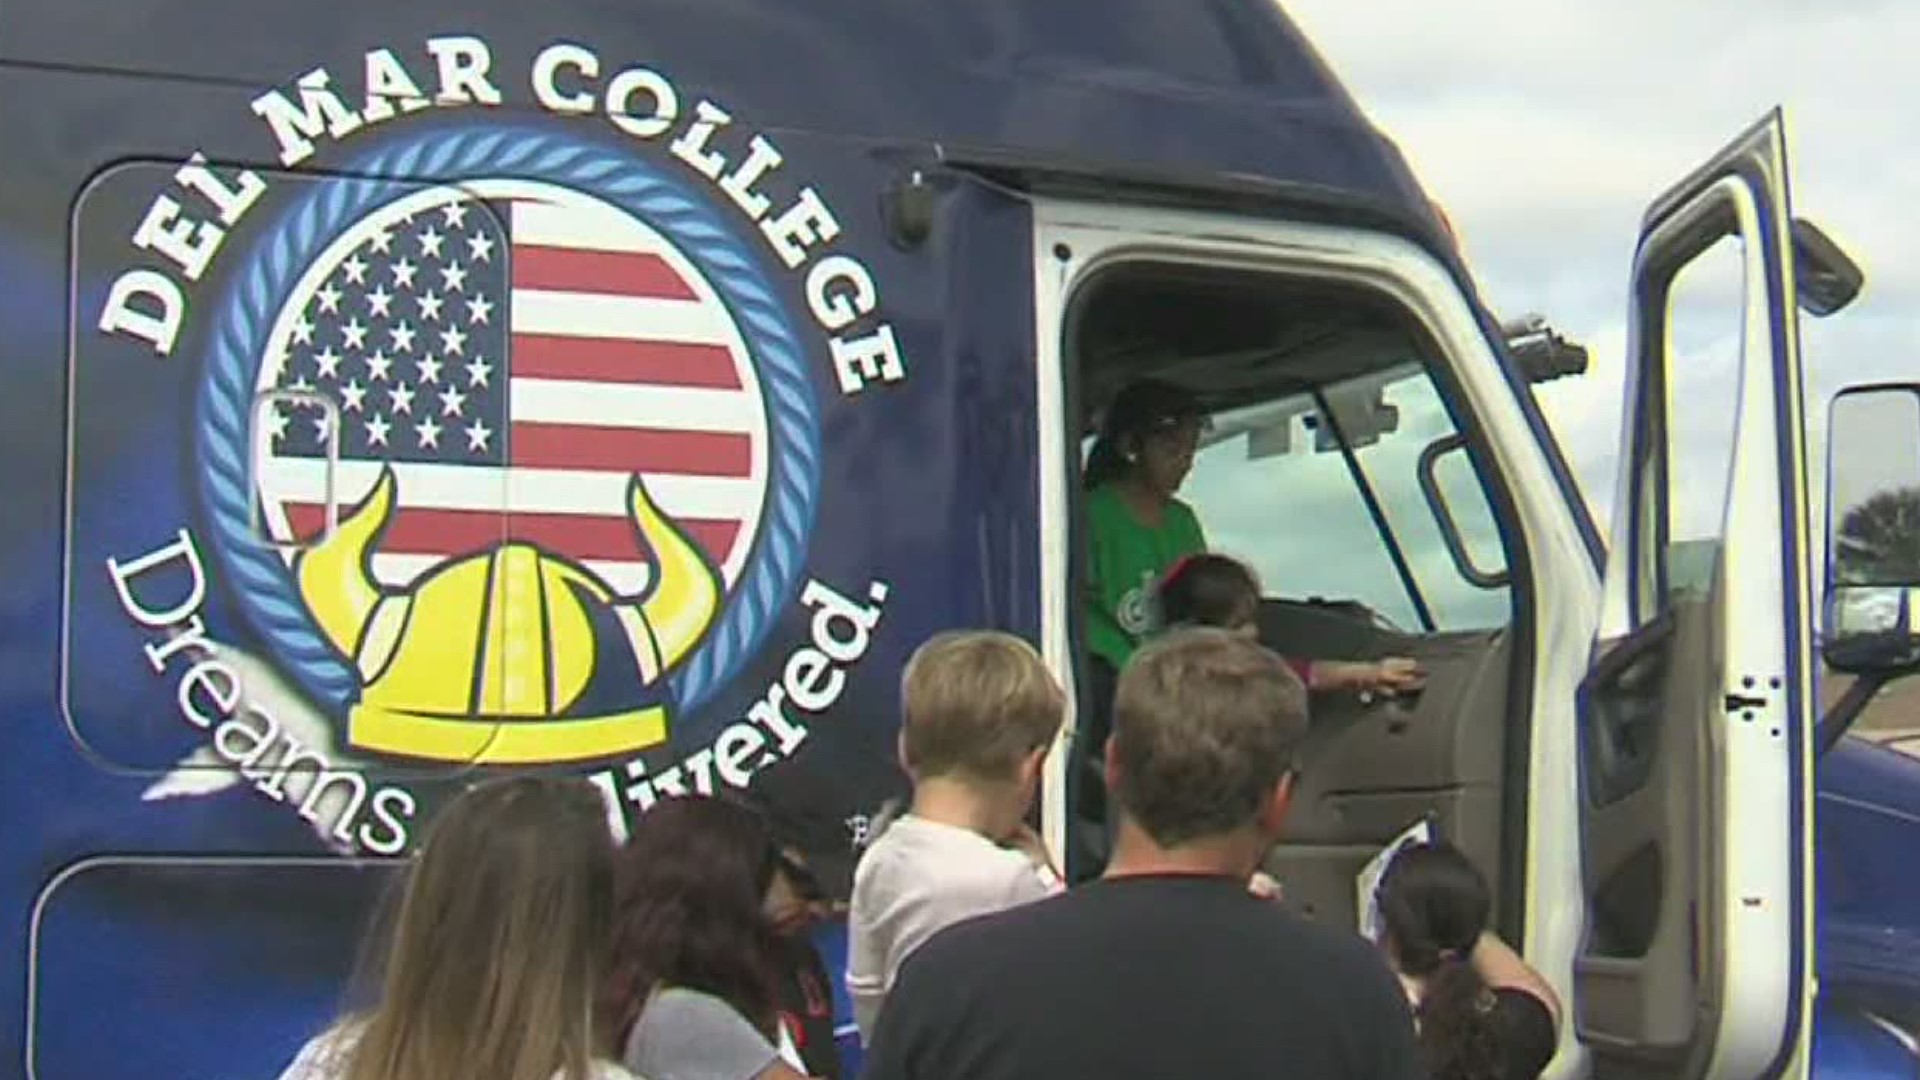 “Touch-A-Truck" gives children a chance to explore everything from emergency vehicles to excavators, big rigs to bulldozers, moving trucks to monster trucks.